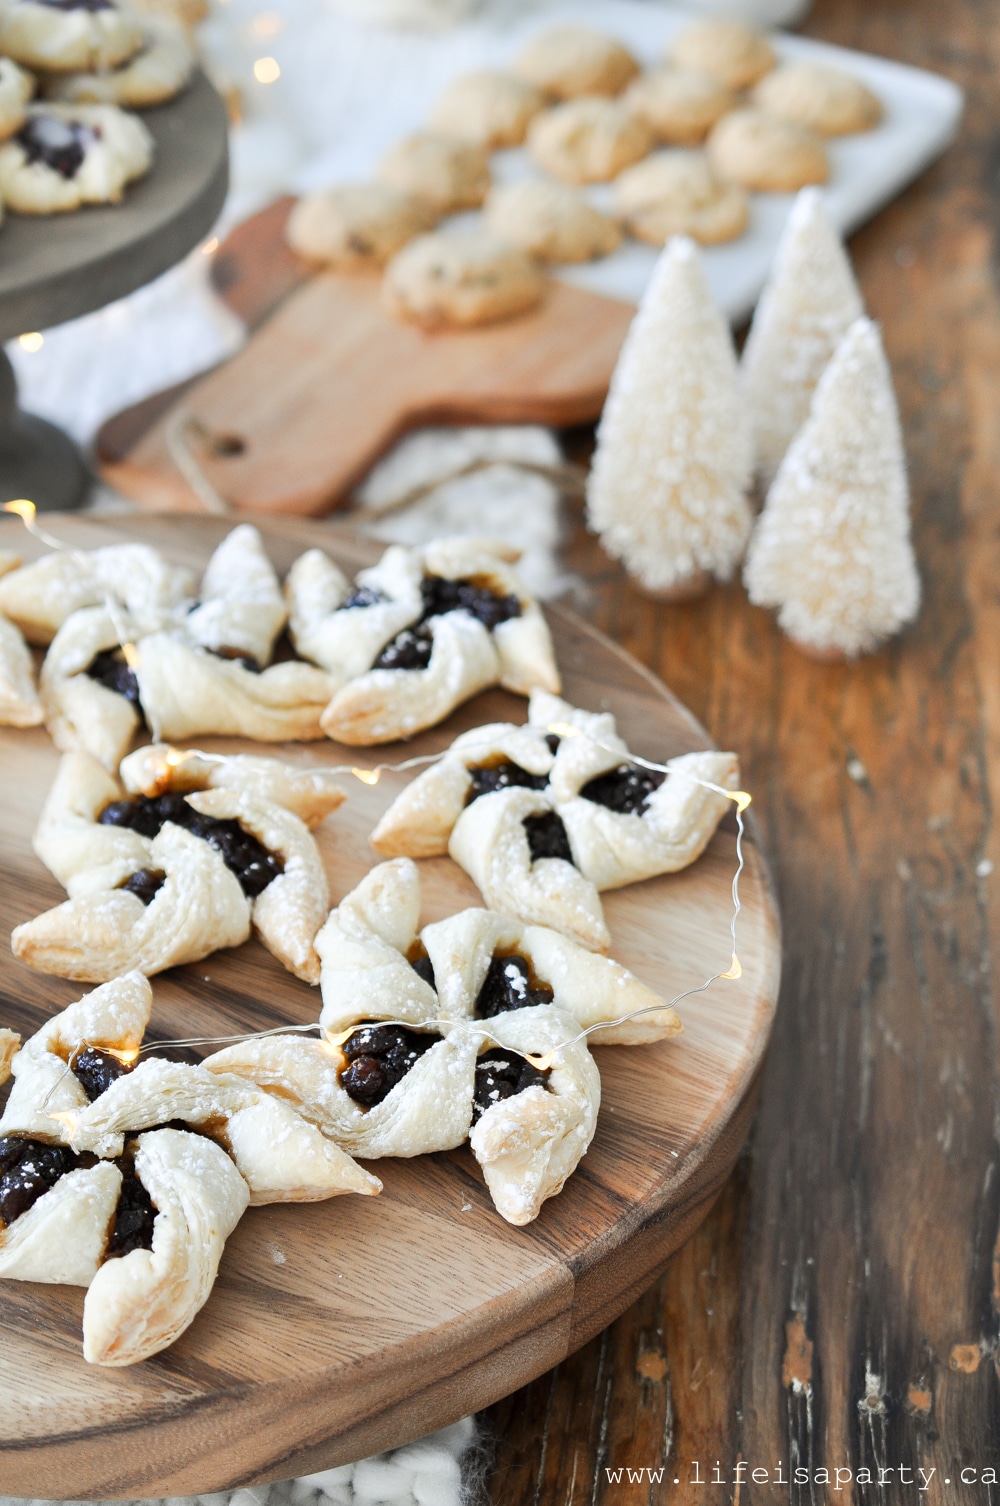 mincemeat pastries made Into pinwheels with puff pastry